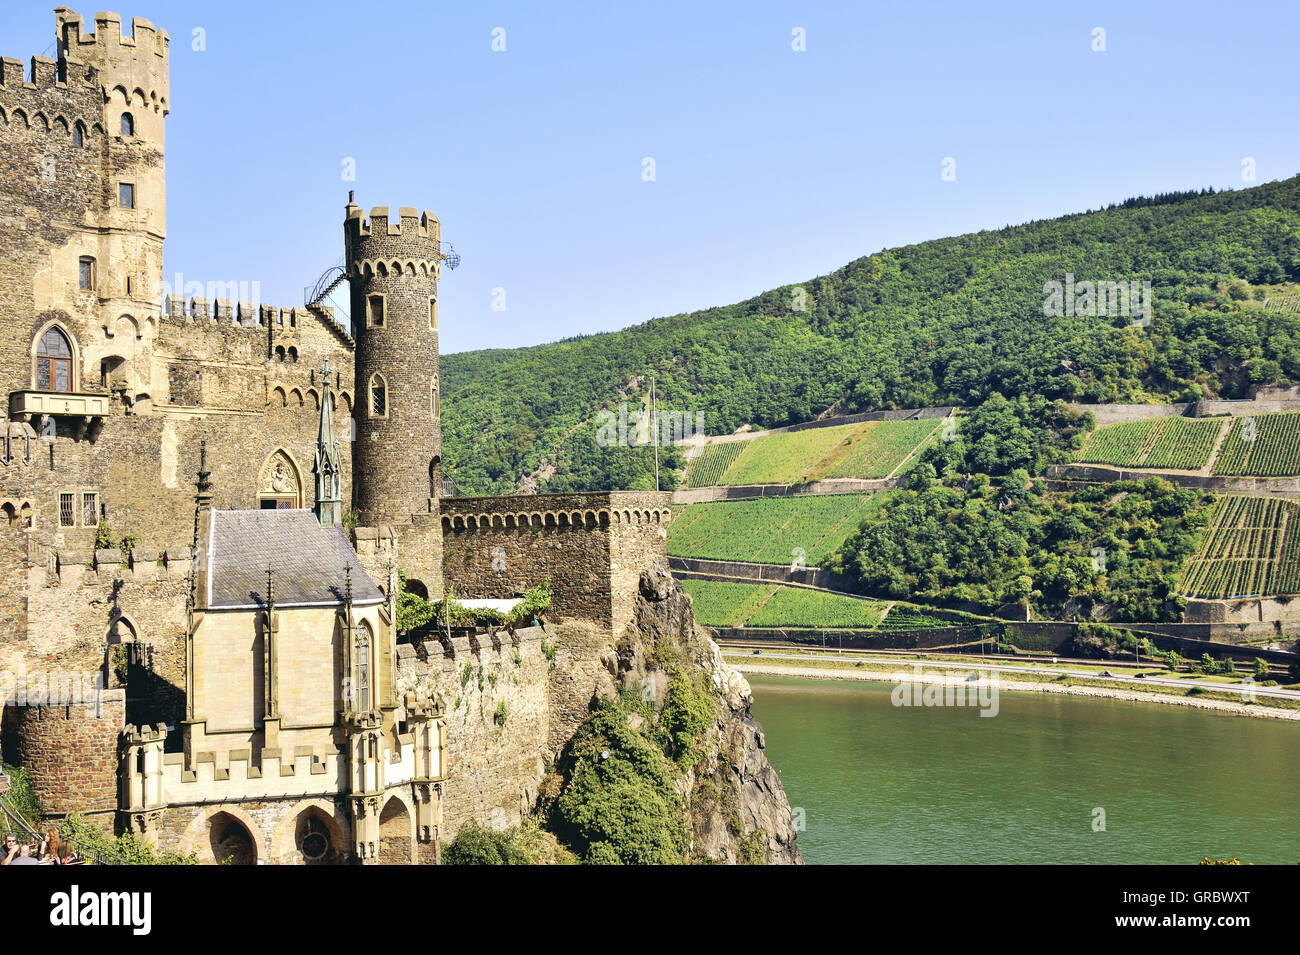 Rheinstein Castle Above The Rhine Near The Town Of Trechtingshausen And Terraced Vines, Upper Middle Rhine Valley, Germany Stock Photo